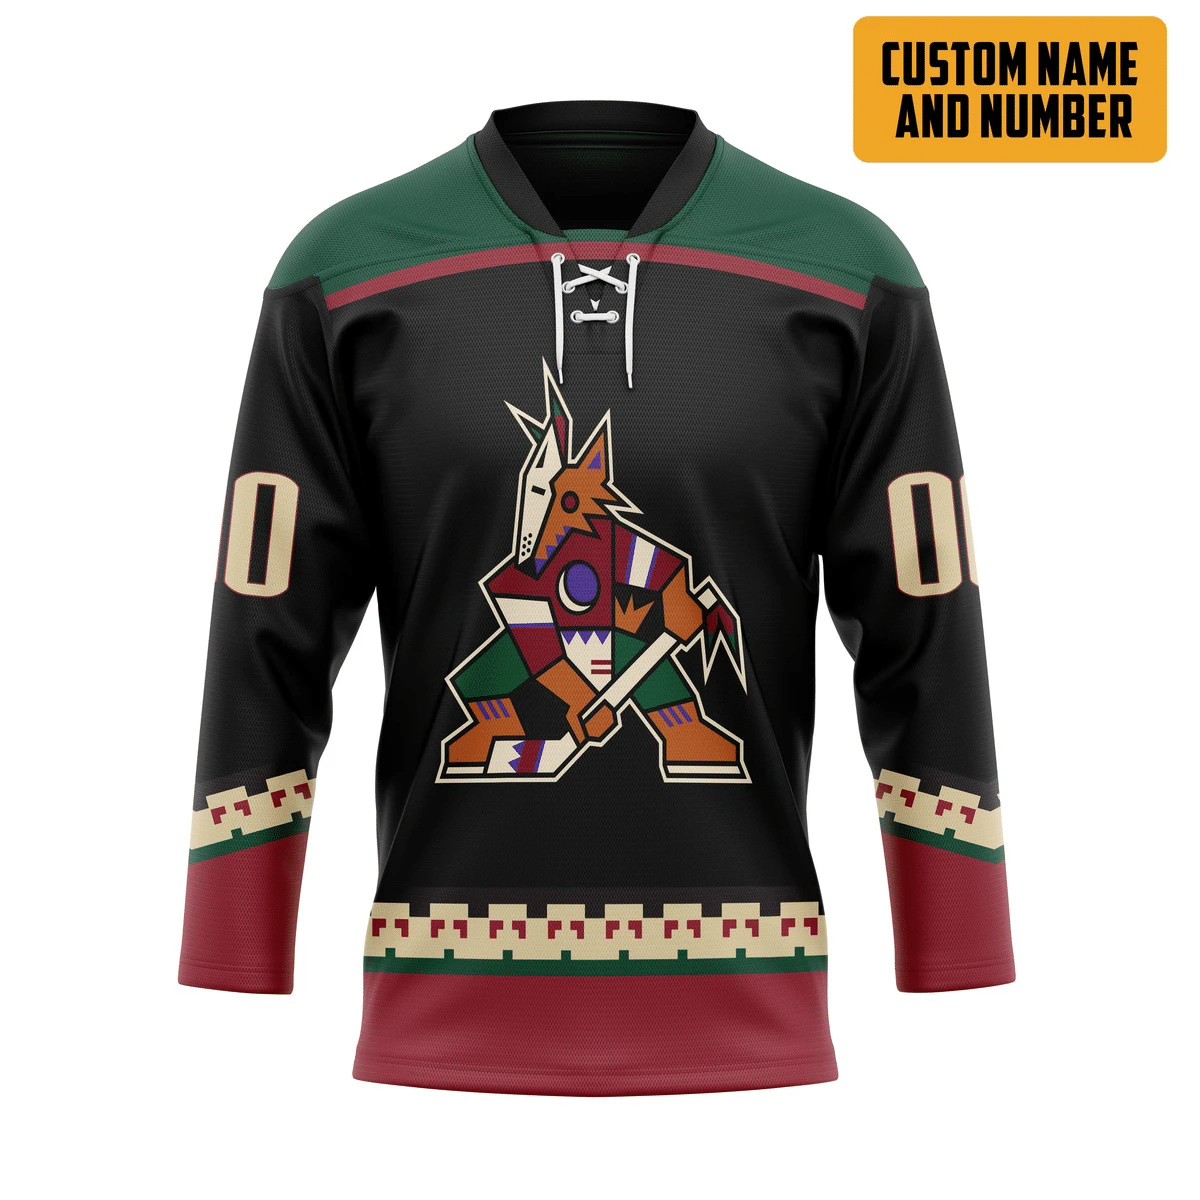 Choosing a hockey jersey is not as difficult as you think. 73